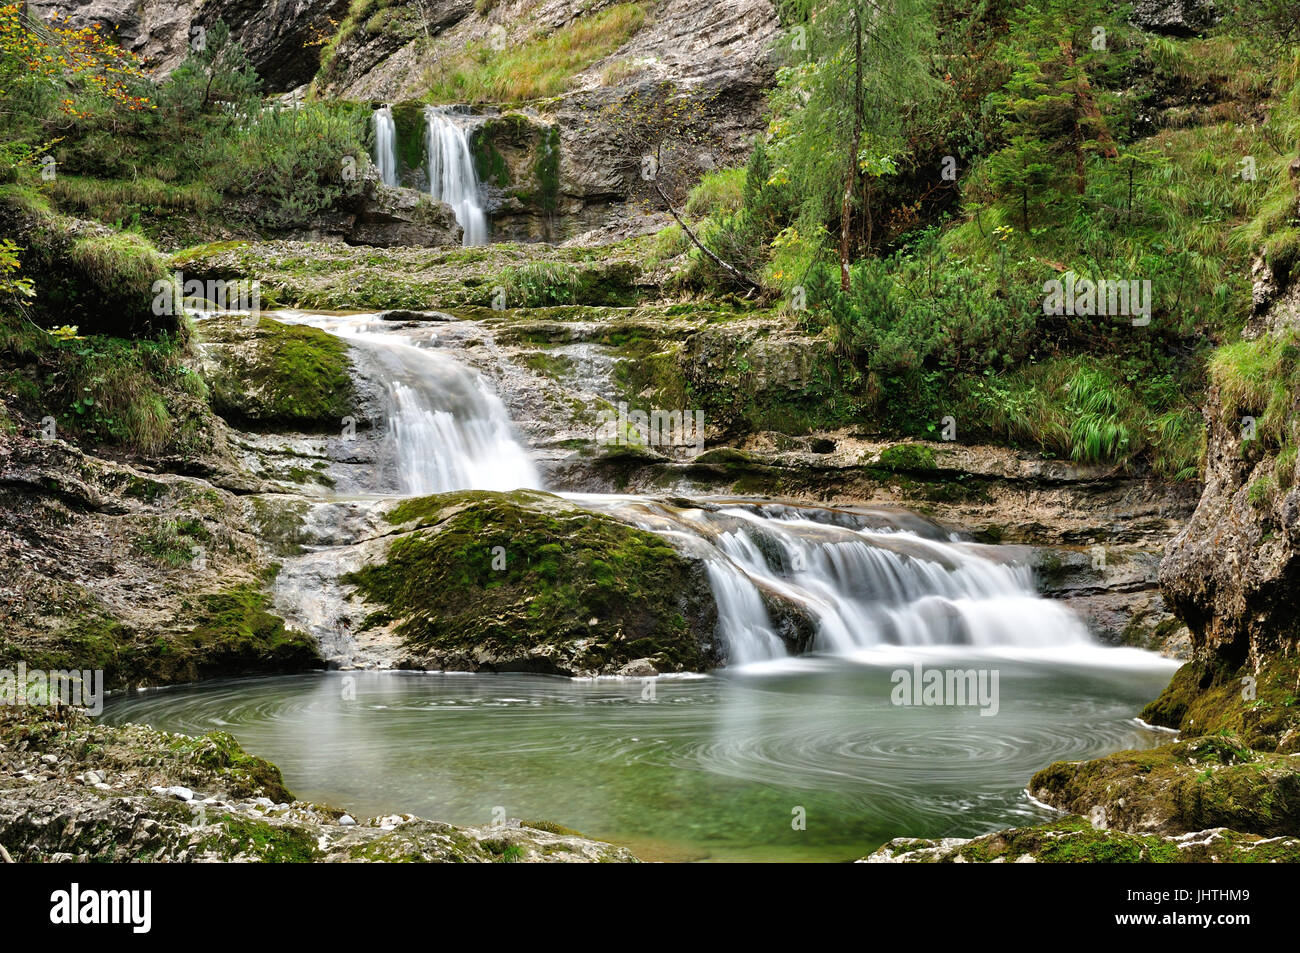 three little waterfalls at a mountain creek in the bavarian alps near Ruhpolding, Germany and Unken, Heutal, Austria Stock Photo